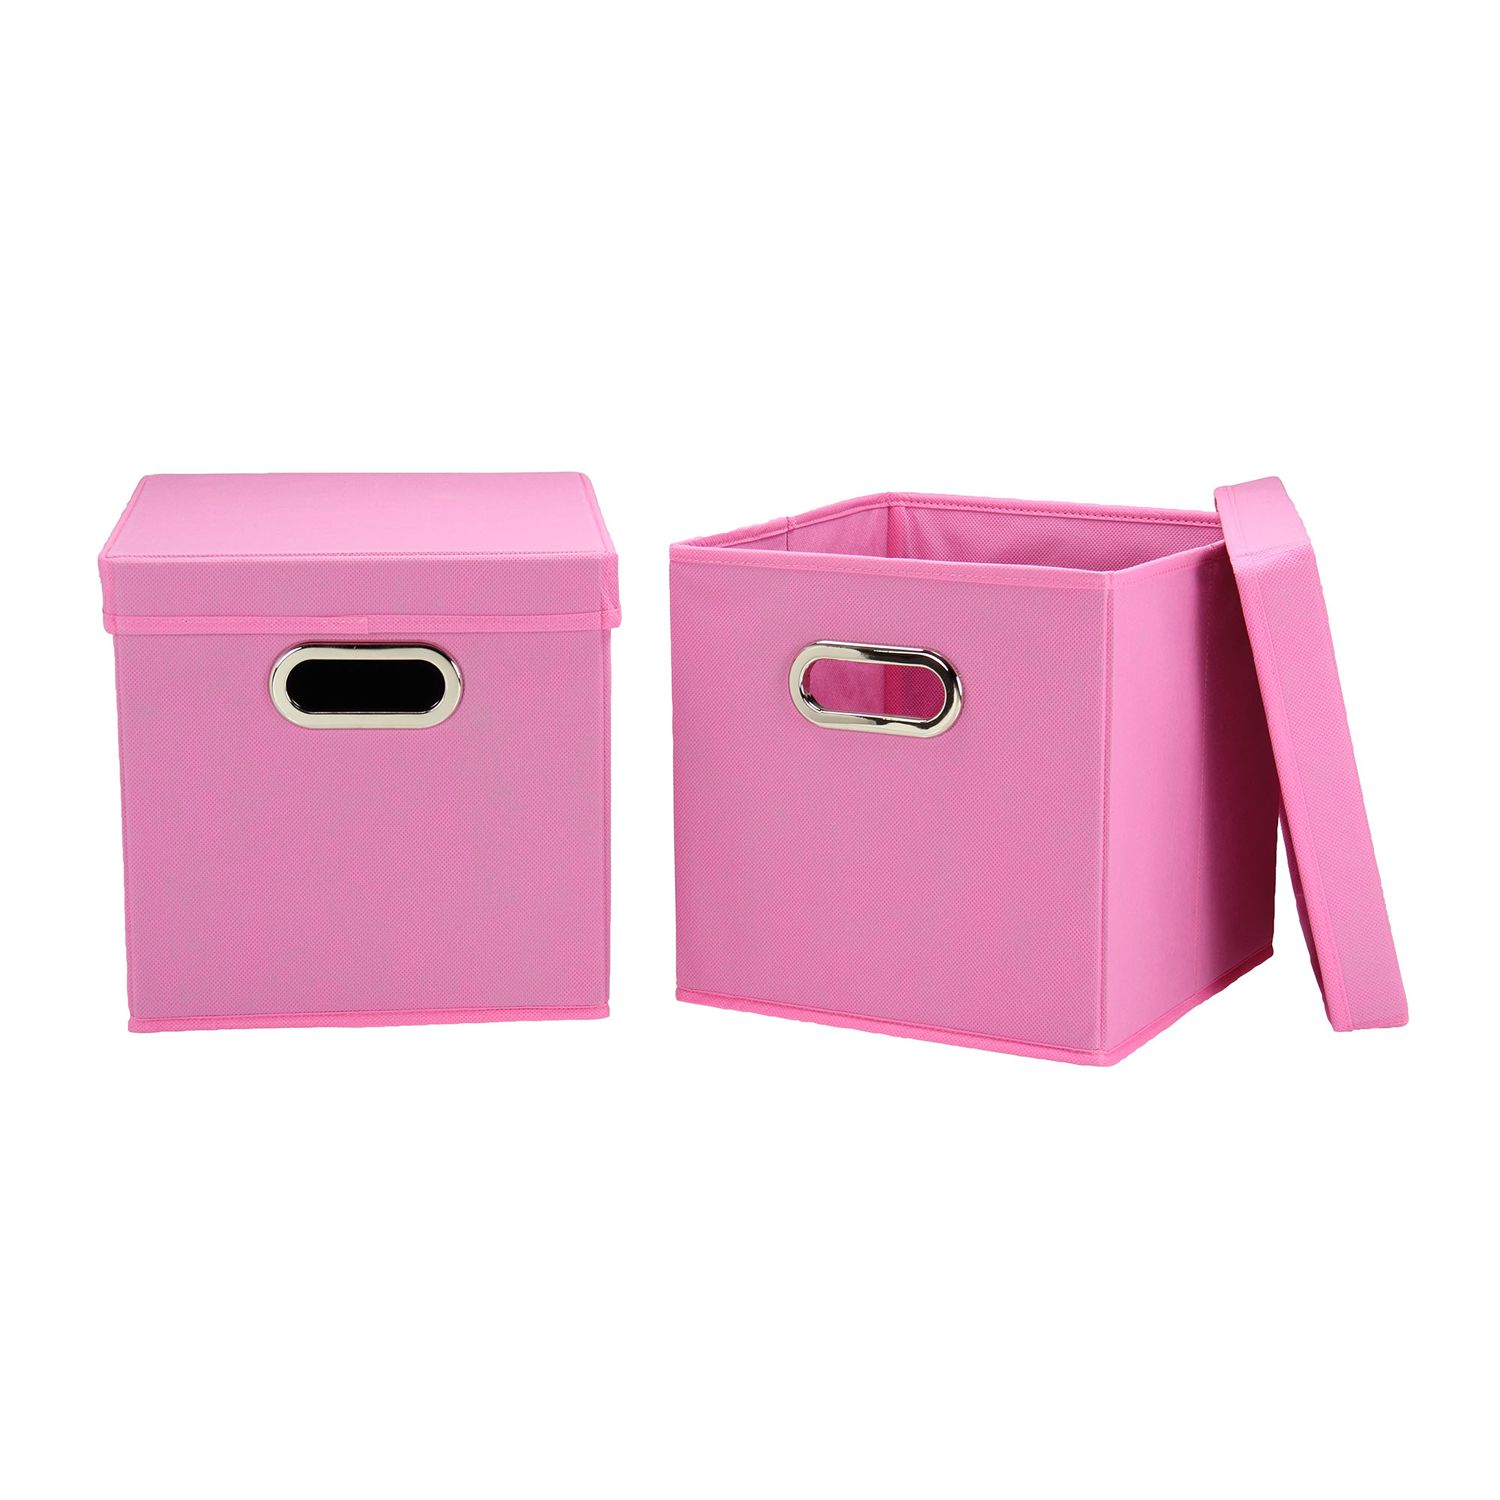 Image for Household Essentials 2-pk. Collapsible Storage Bins at Kohl's.